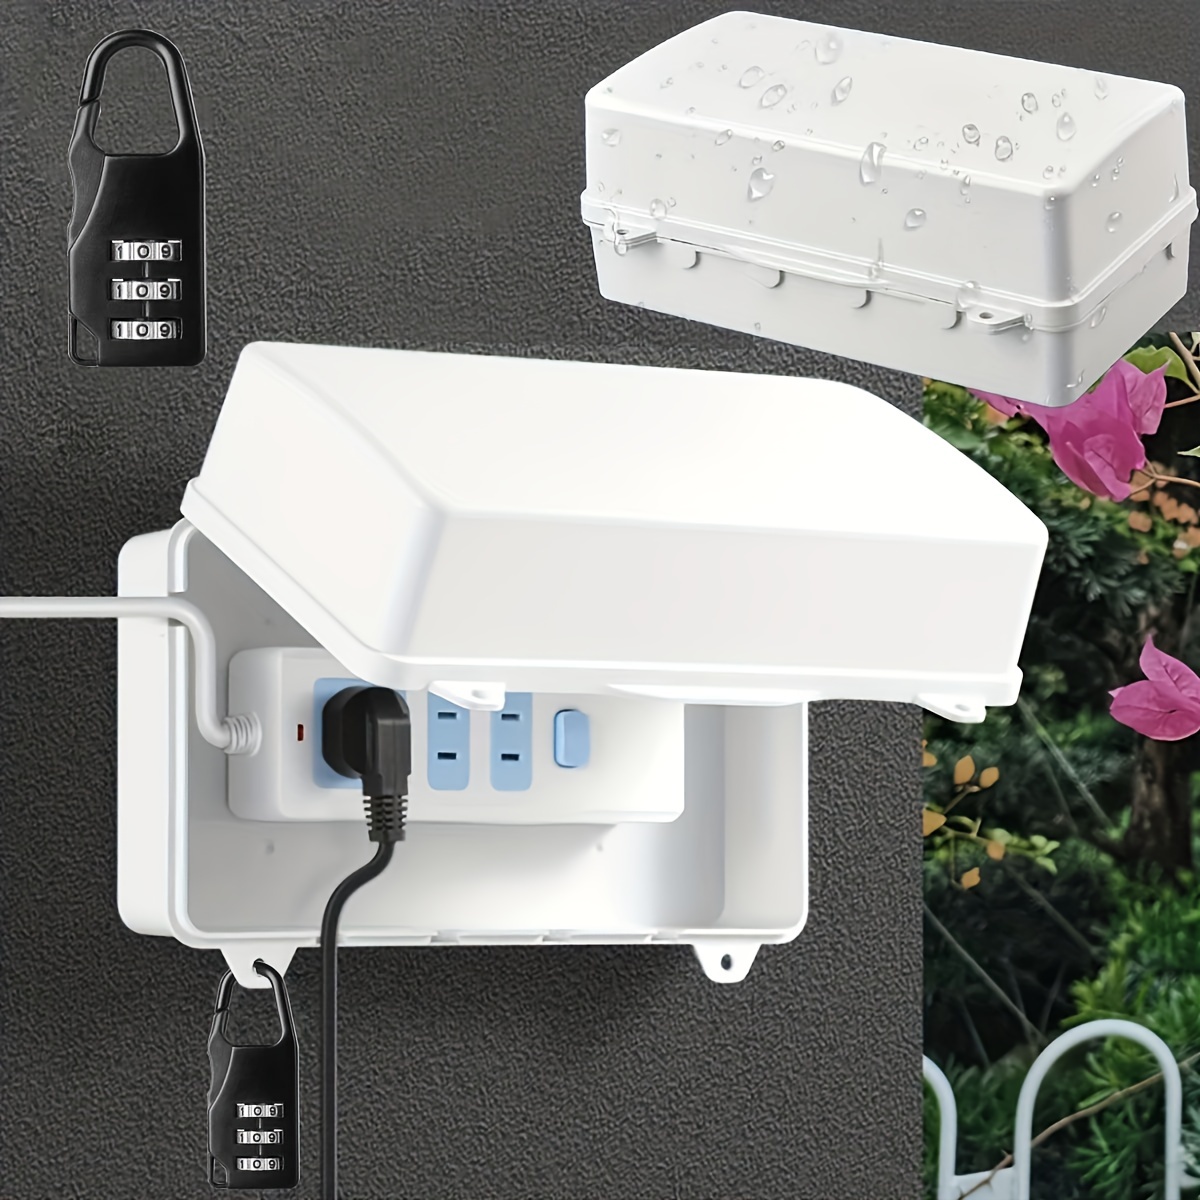 Weatherproof Cord Box, Outdoor Appliance Box, Timer Indoor And Outdoor  Power Cord Housing, Extension Cable, Transformer, Power Strip, Light,  Waterproo